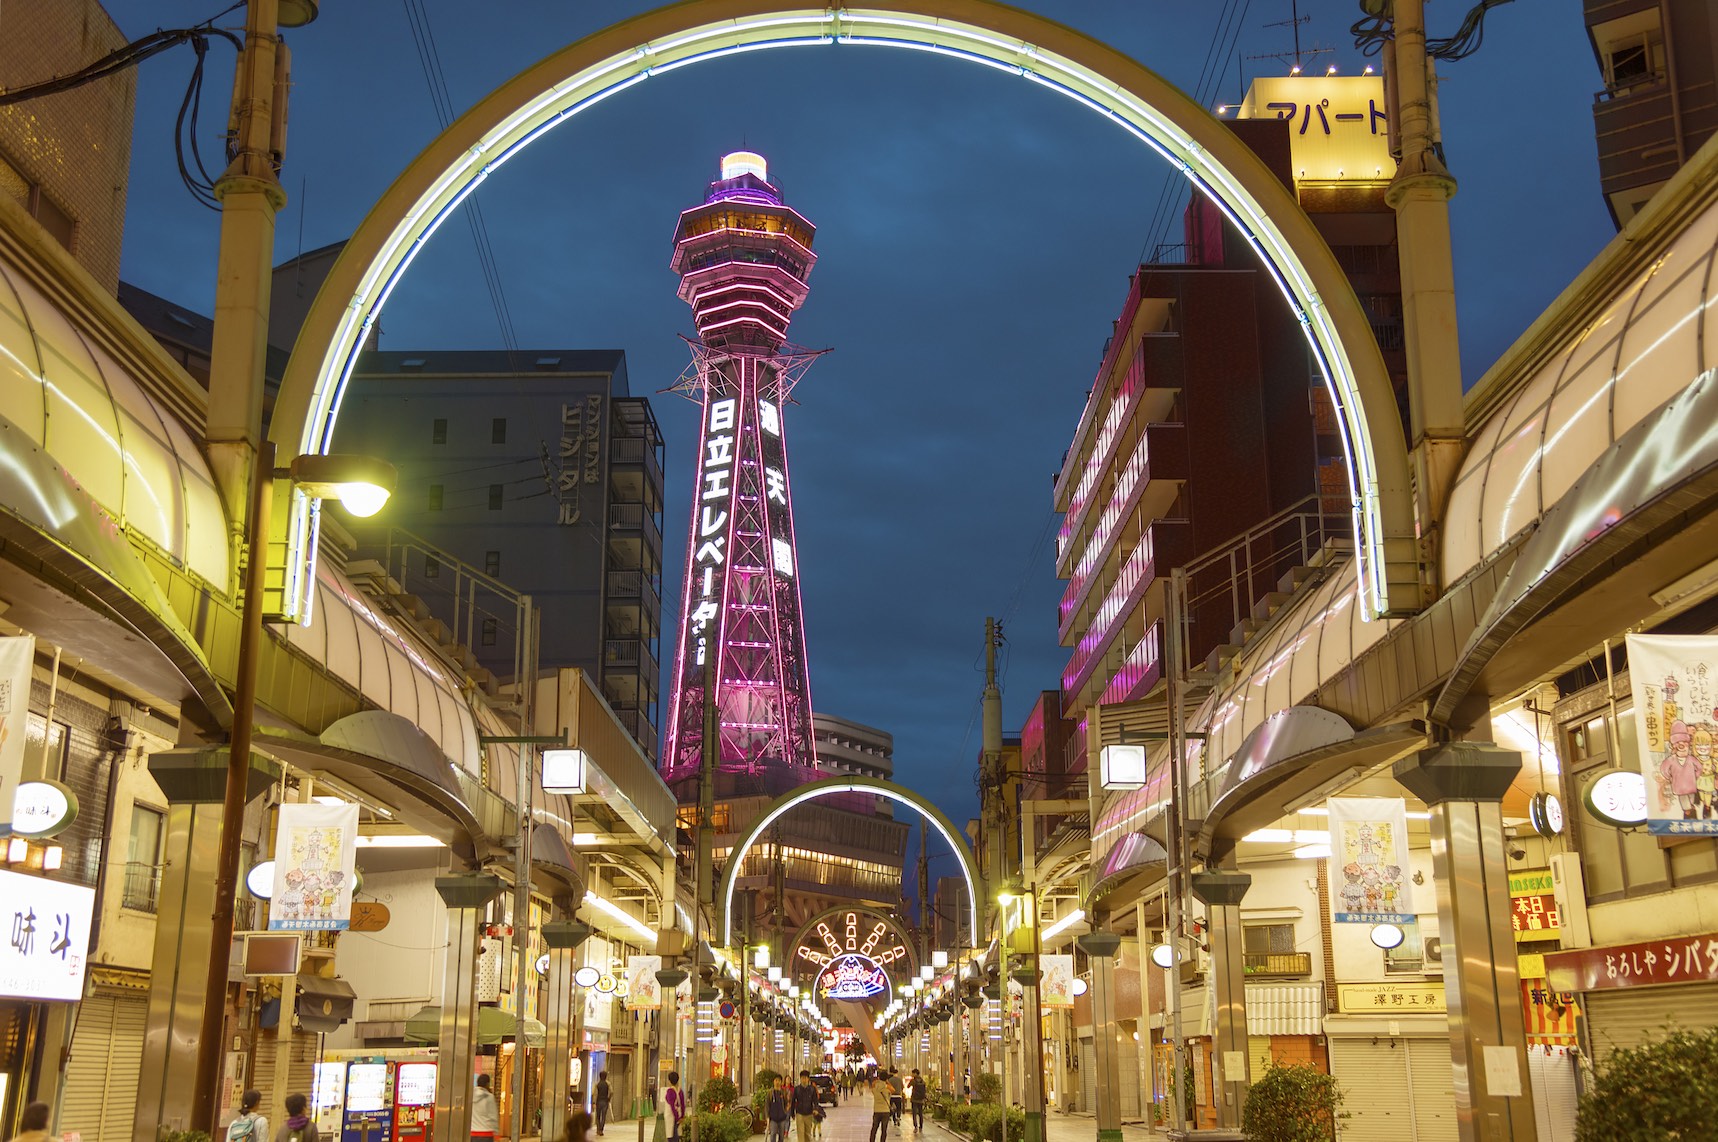 Top 10 Spots That Will Make You Fall In Love With Osaka